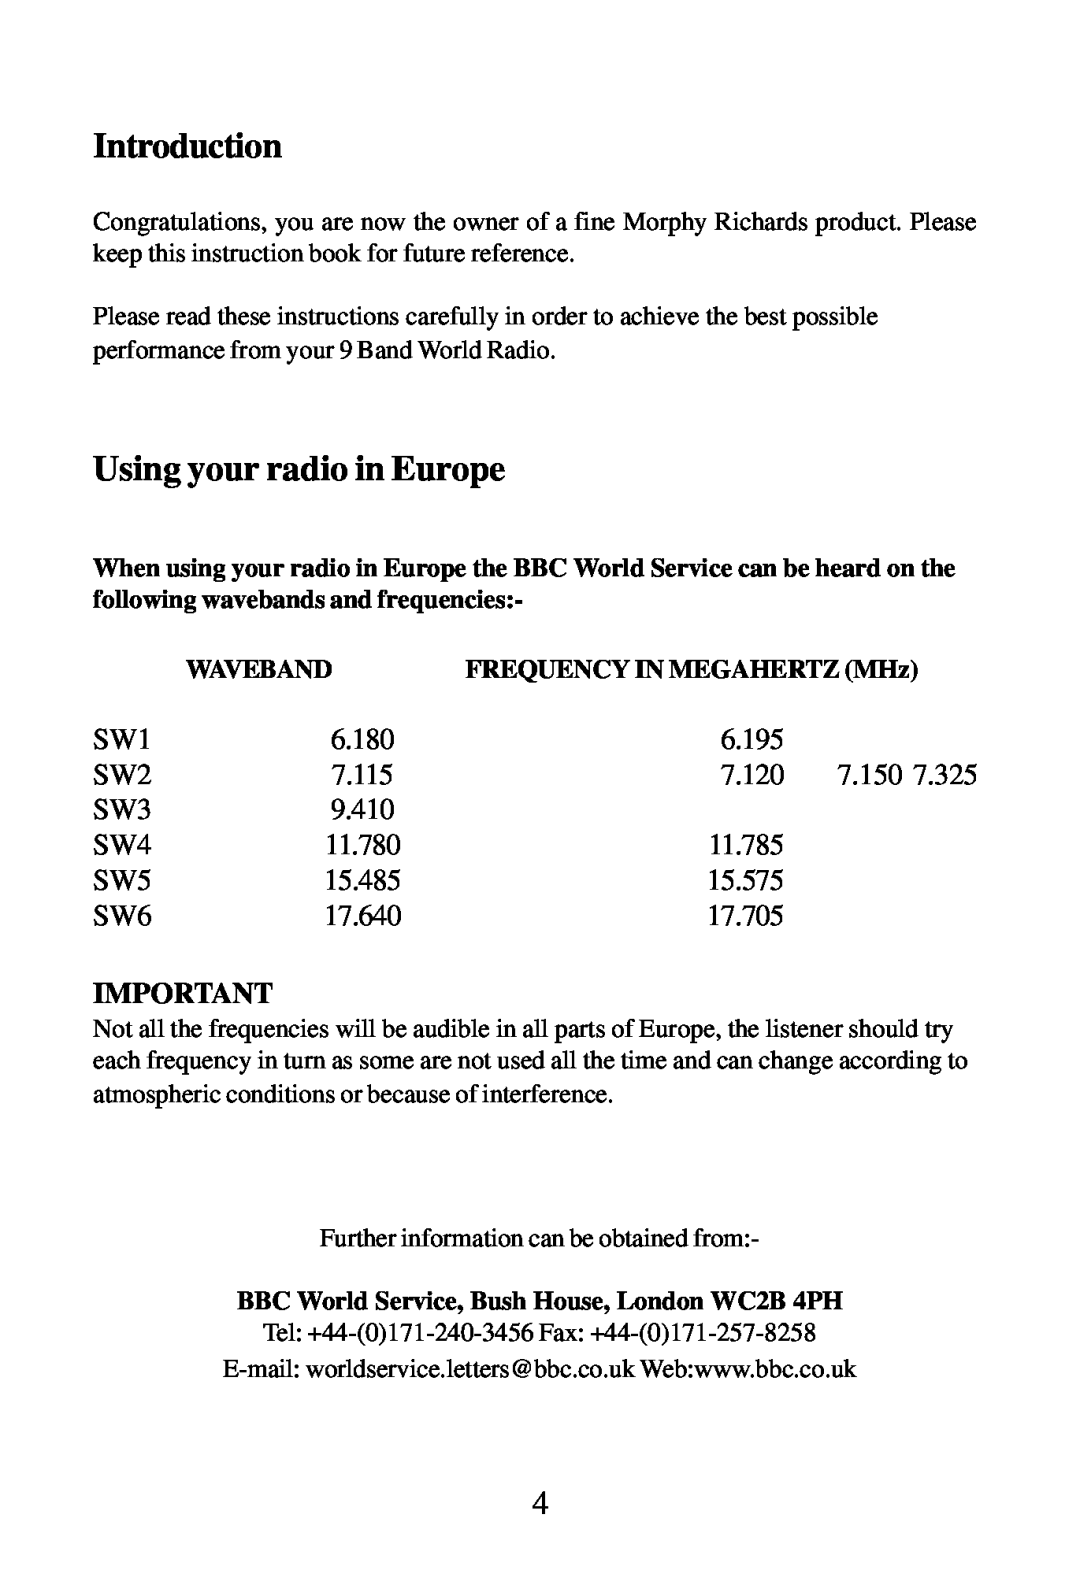 Morphy Richards Radio operating instructions Introduction, Using your radio in Europe 